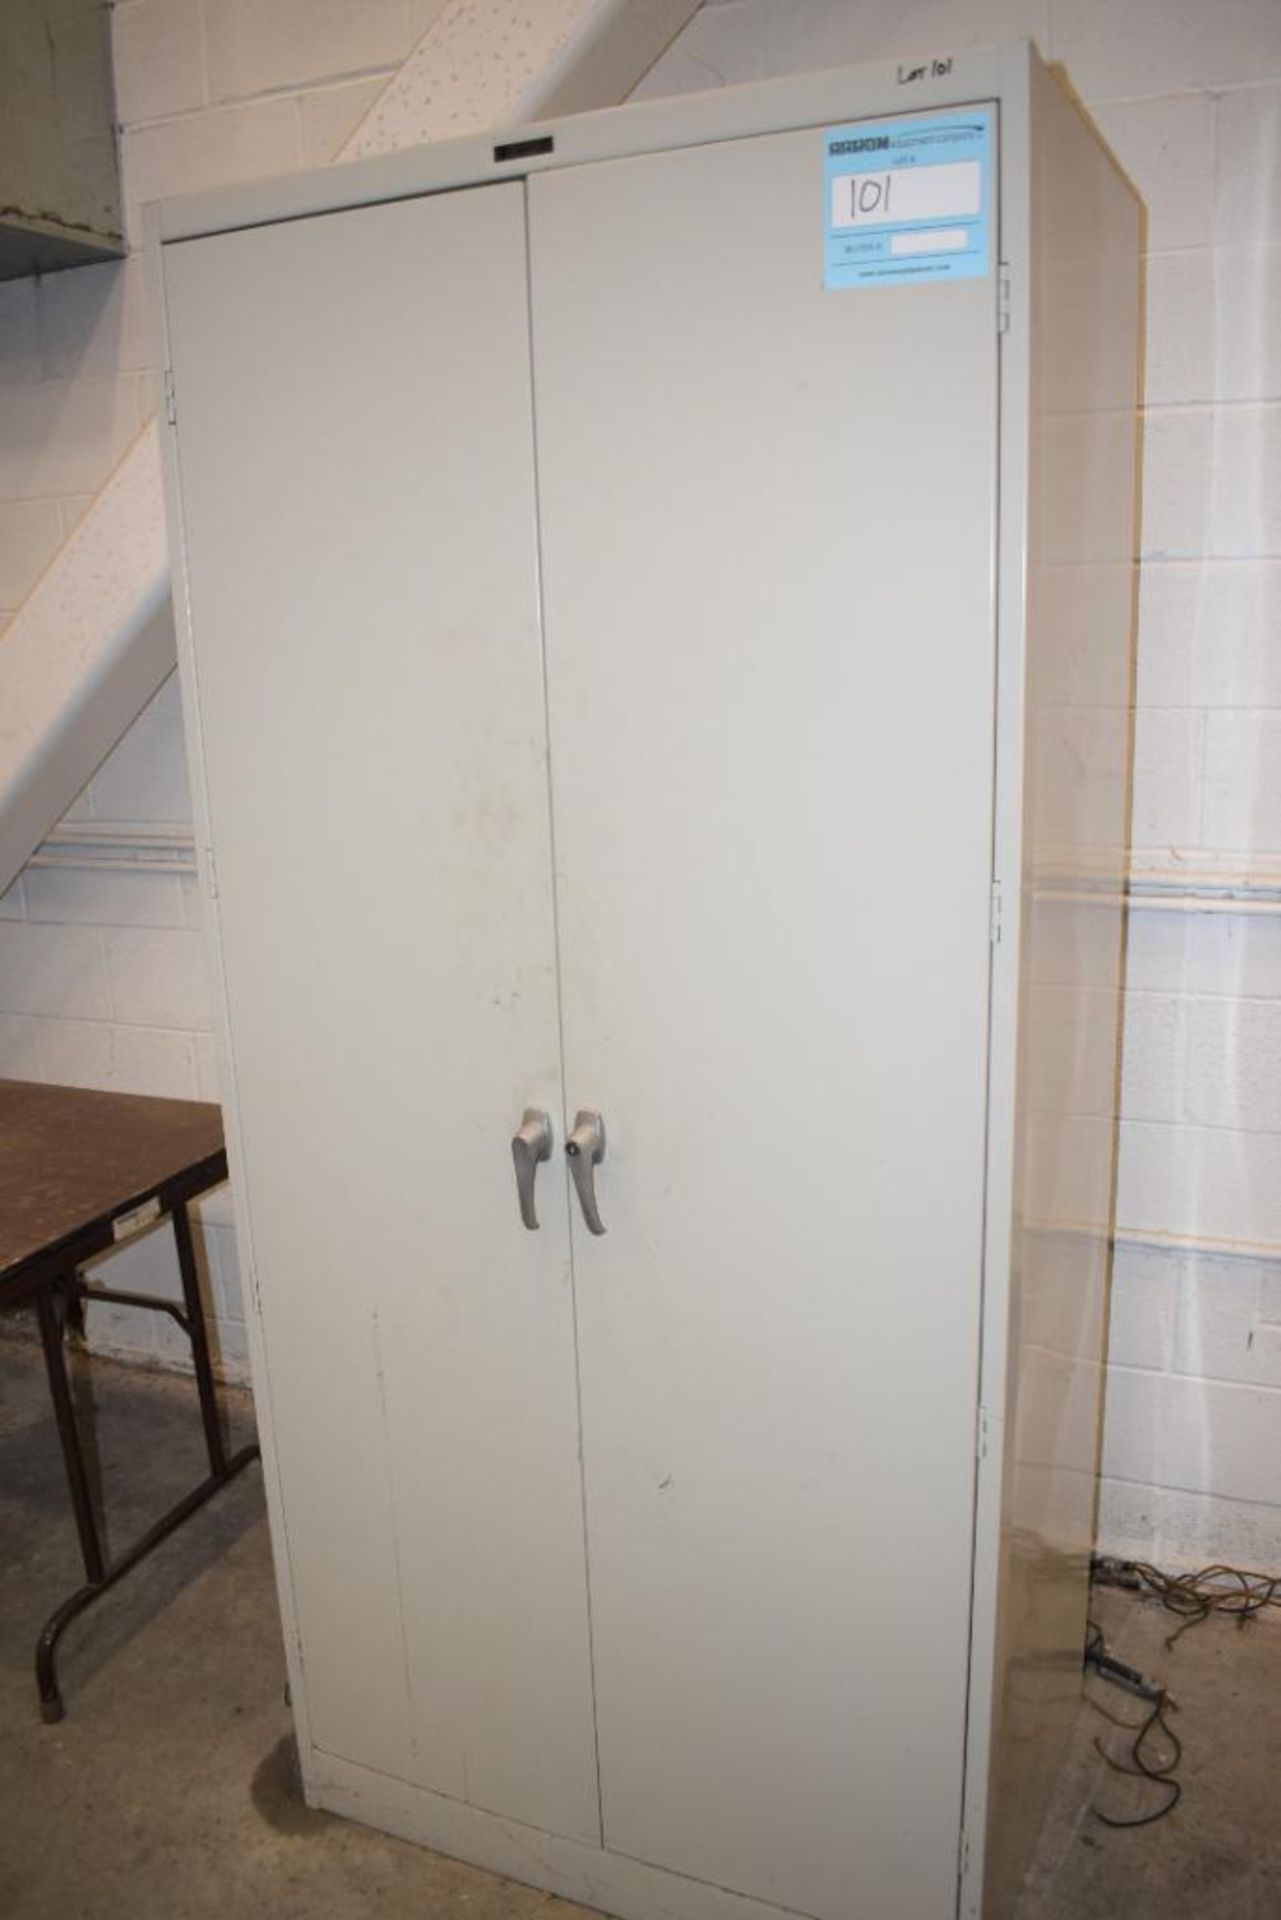 Lot Consisting Of: (1) 2 Door metal cabinets with miscellaneous tools, including saw, batteries, met - Image 2 of 10